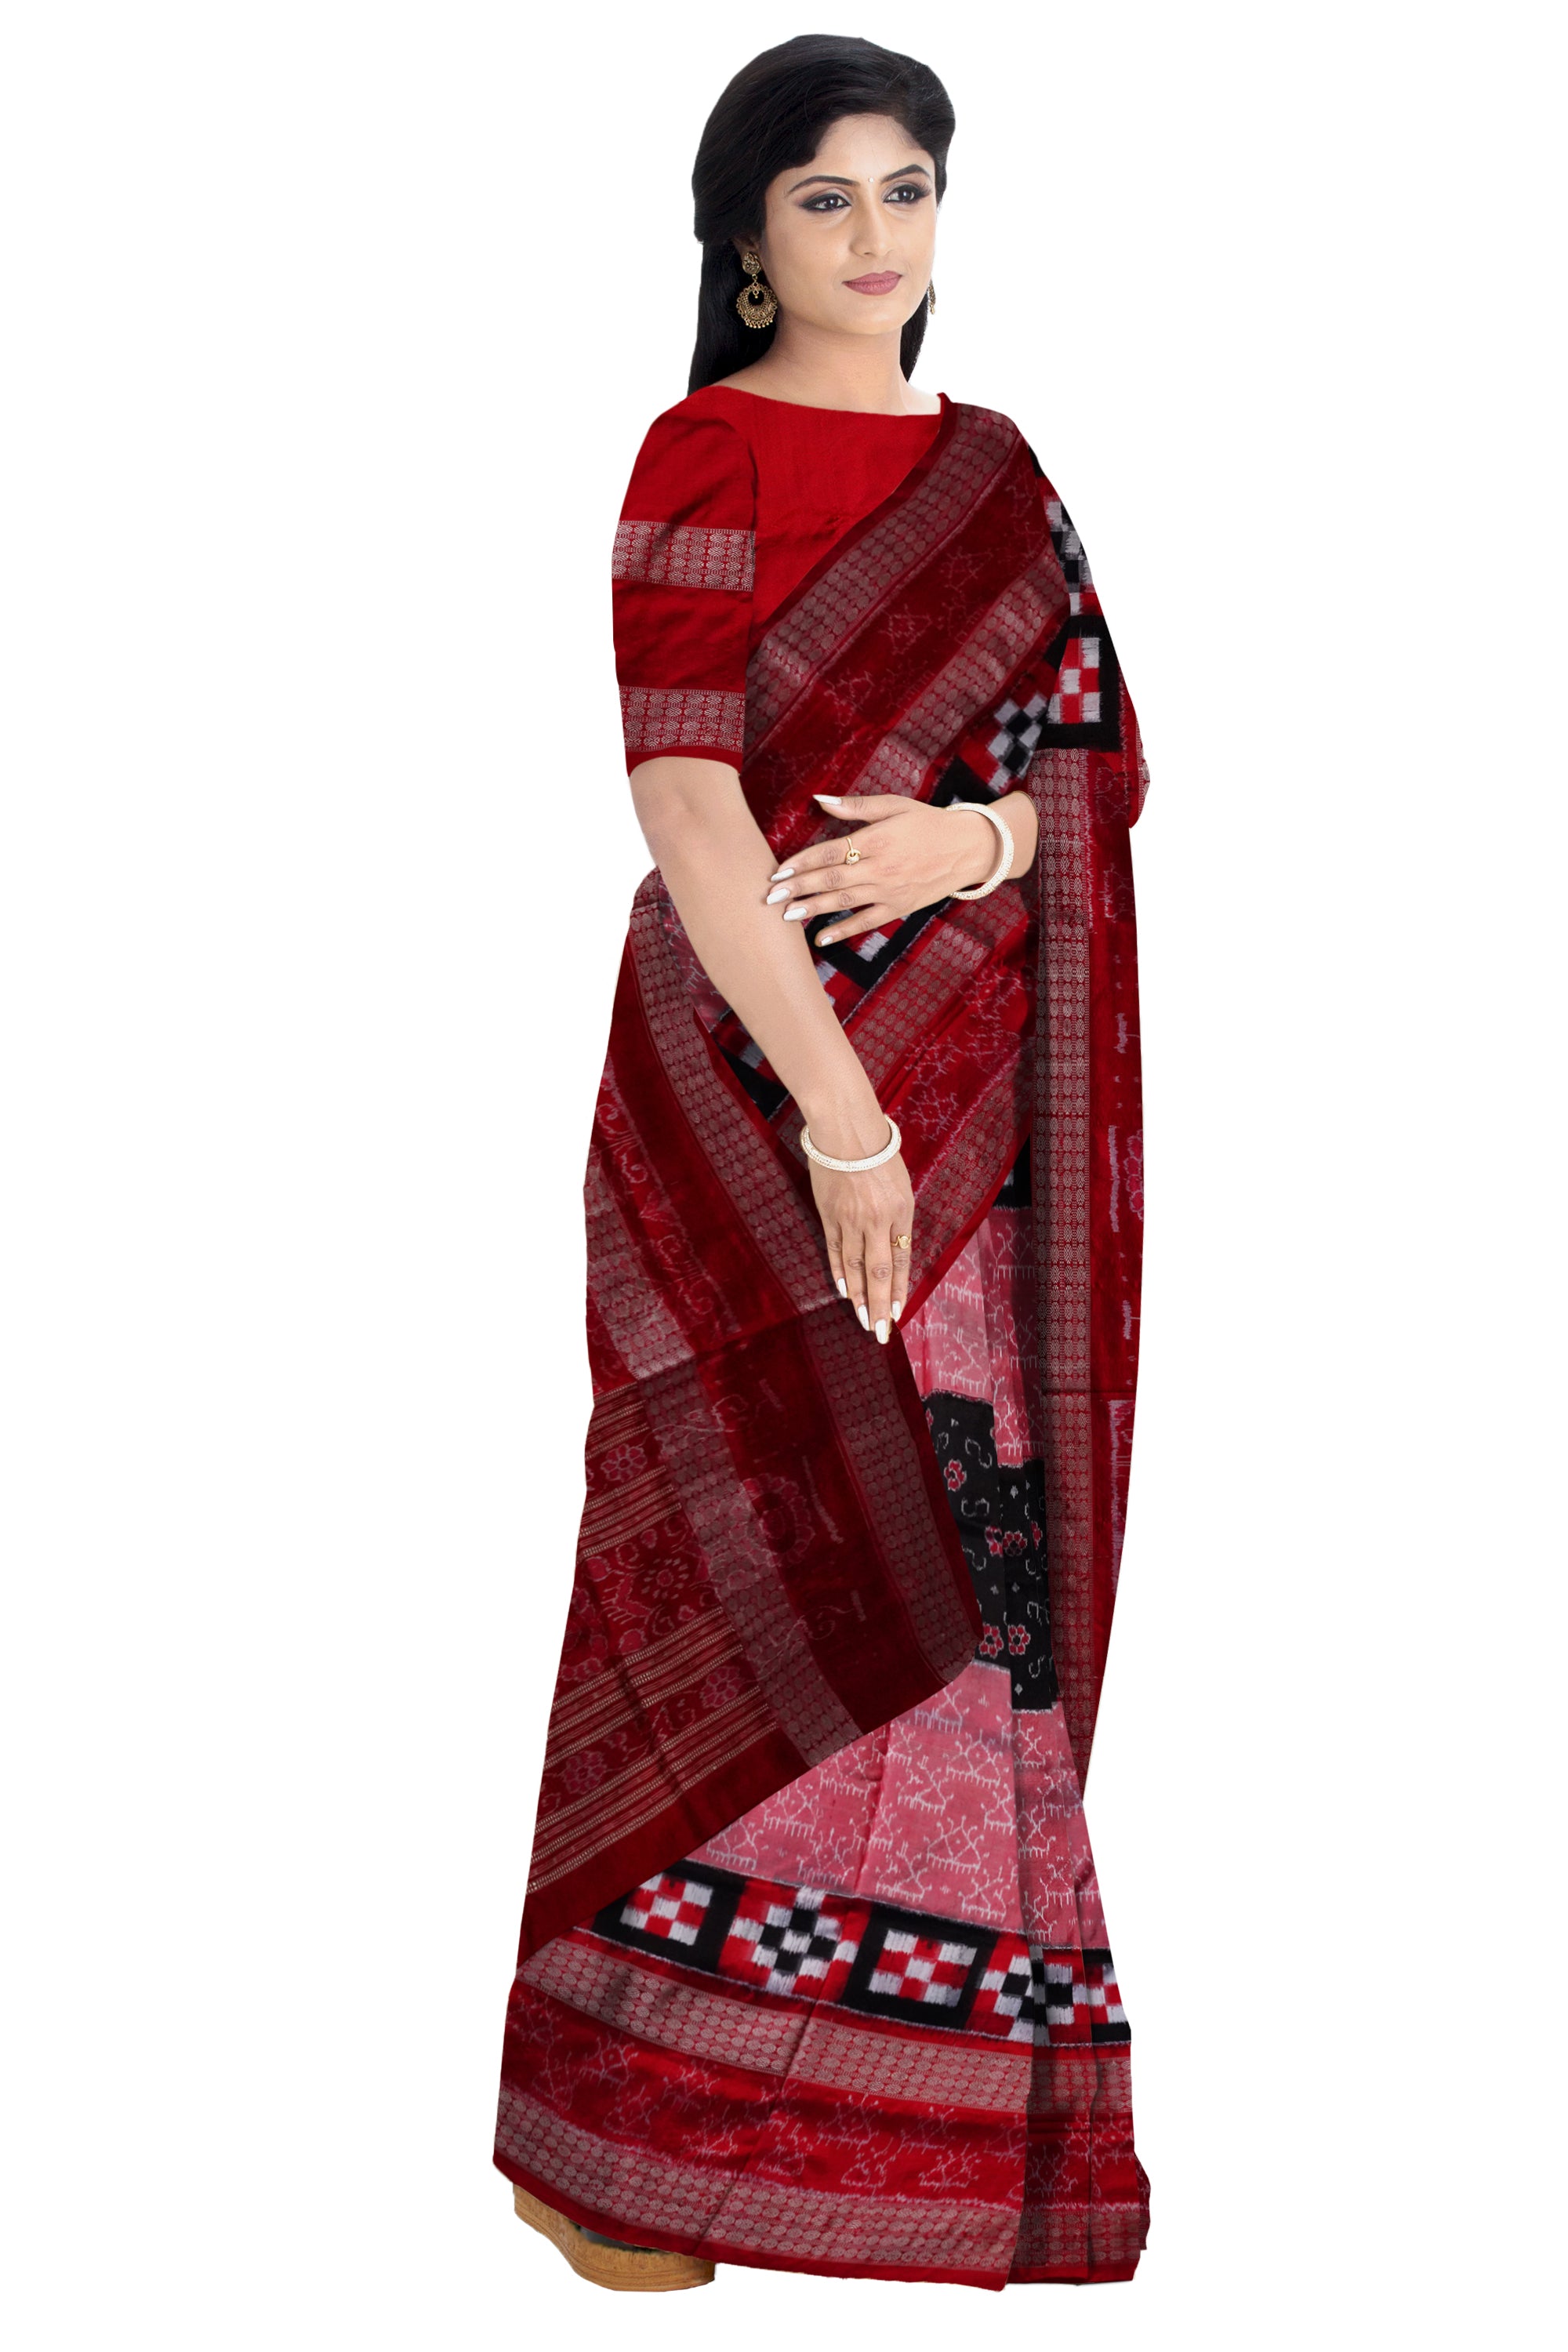 Baby-pink,Black and Red color flowers with pasapali pattern pure silk pata saree with double rudraksha border design. - Koshali Arts & Crafts Enterprise